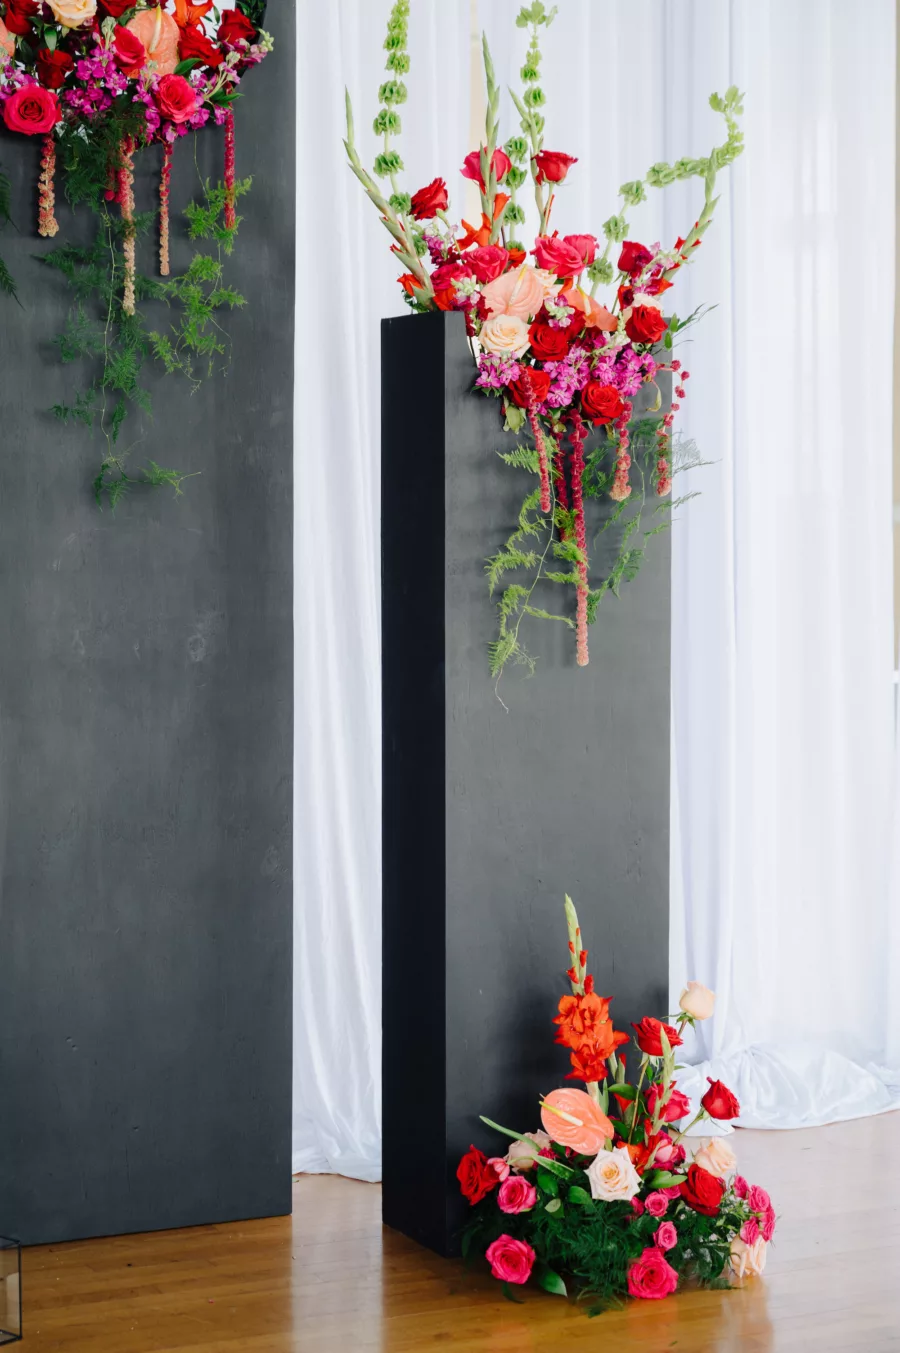 Unique Black Spring Wedding Ceremony Altar Backdrop with Bold Pink and Red Roses, Orange Anthurium and Greenery | Tampa Bay Florist Save The Date Florida